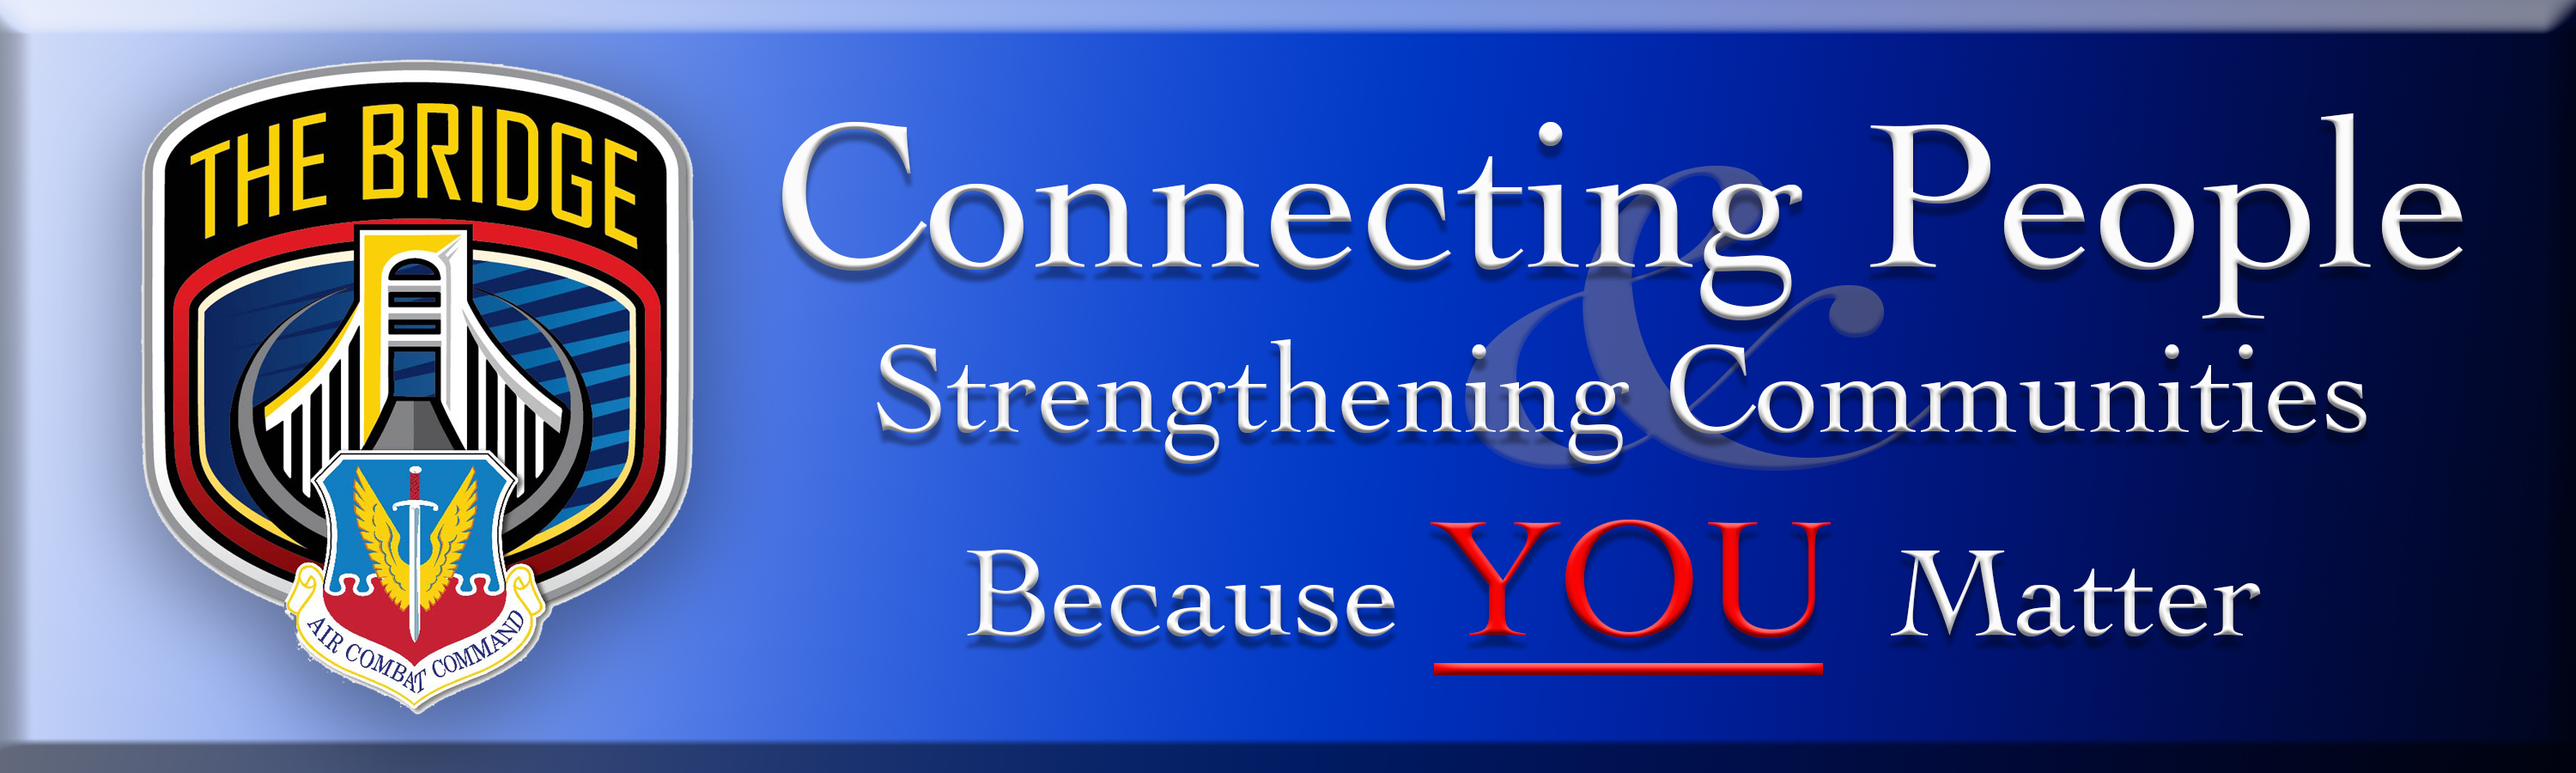 Connecting People and Strengthening Communities graphic with The Bridge Logo on the left. 